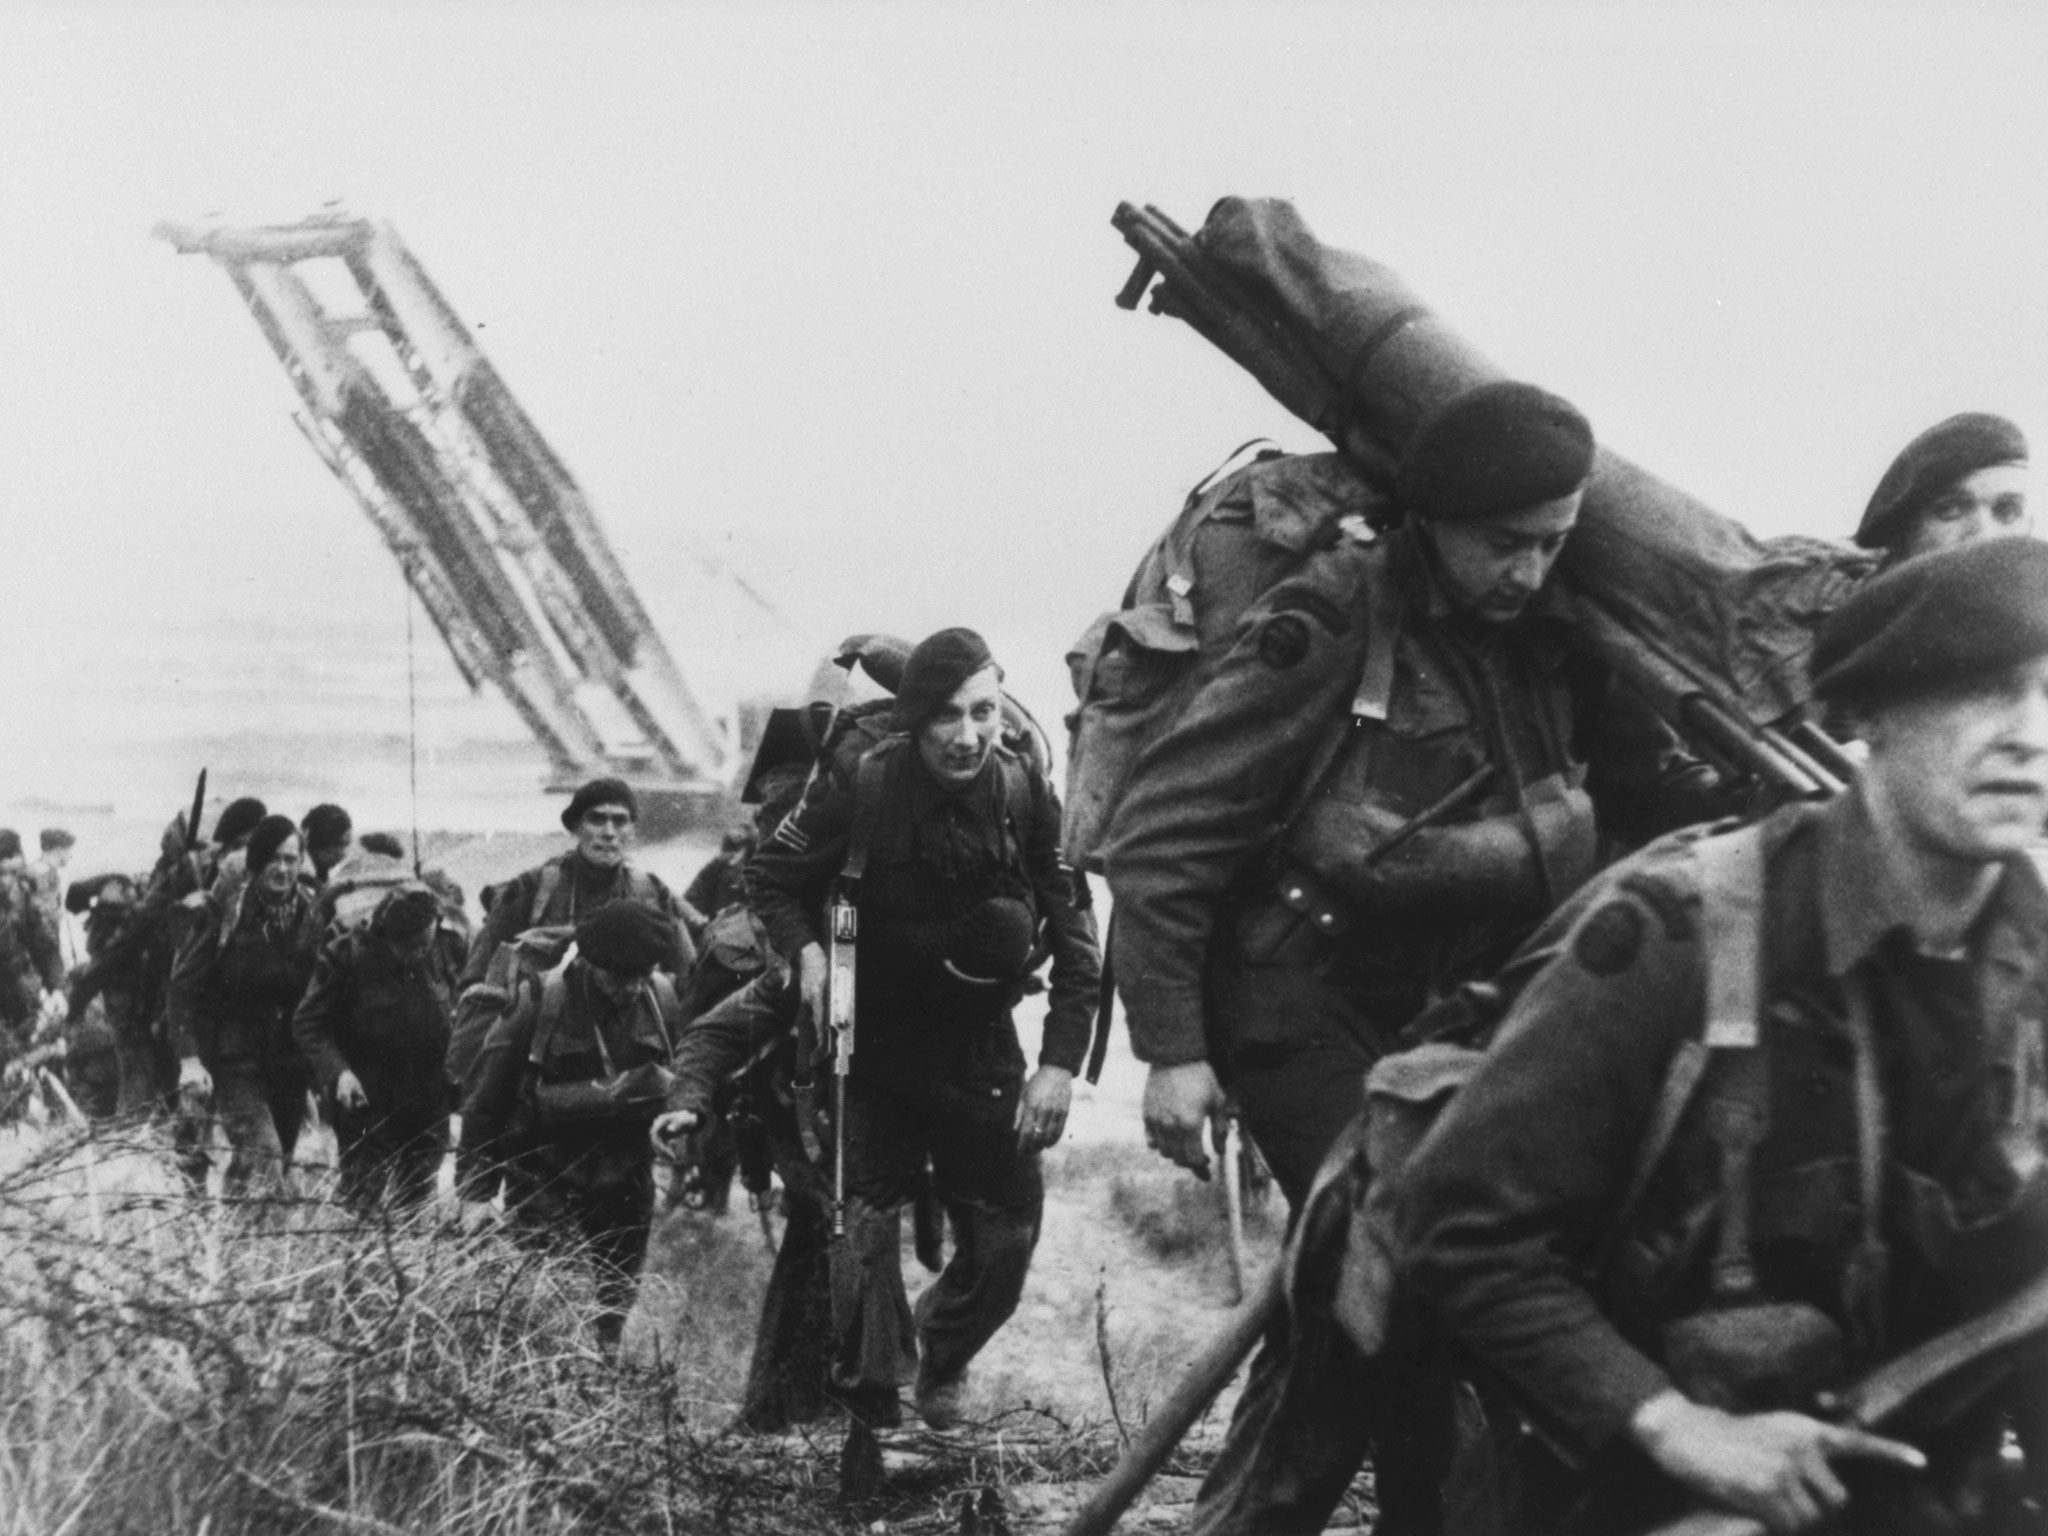 D-Day landings 70th anniversary: 20 facts about 'Operation Overlord